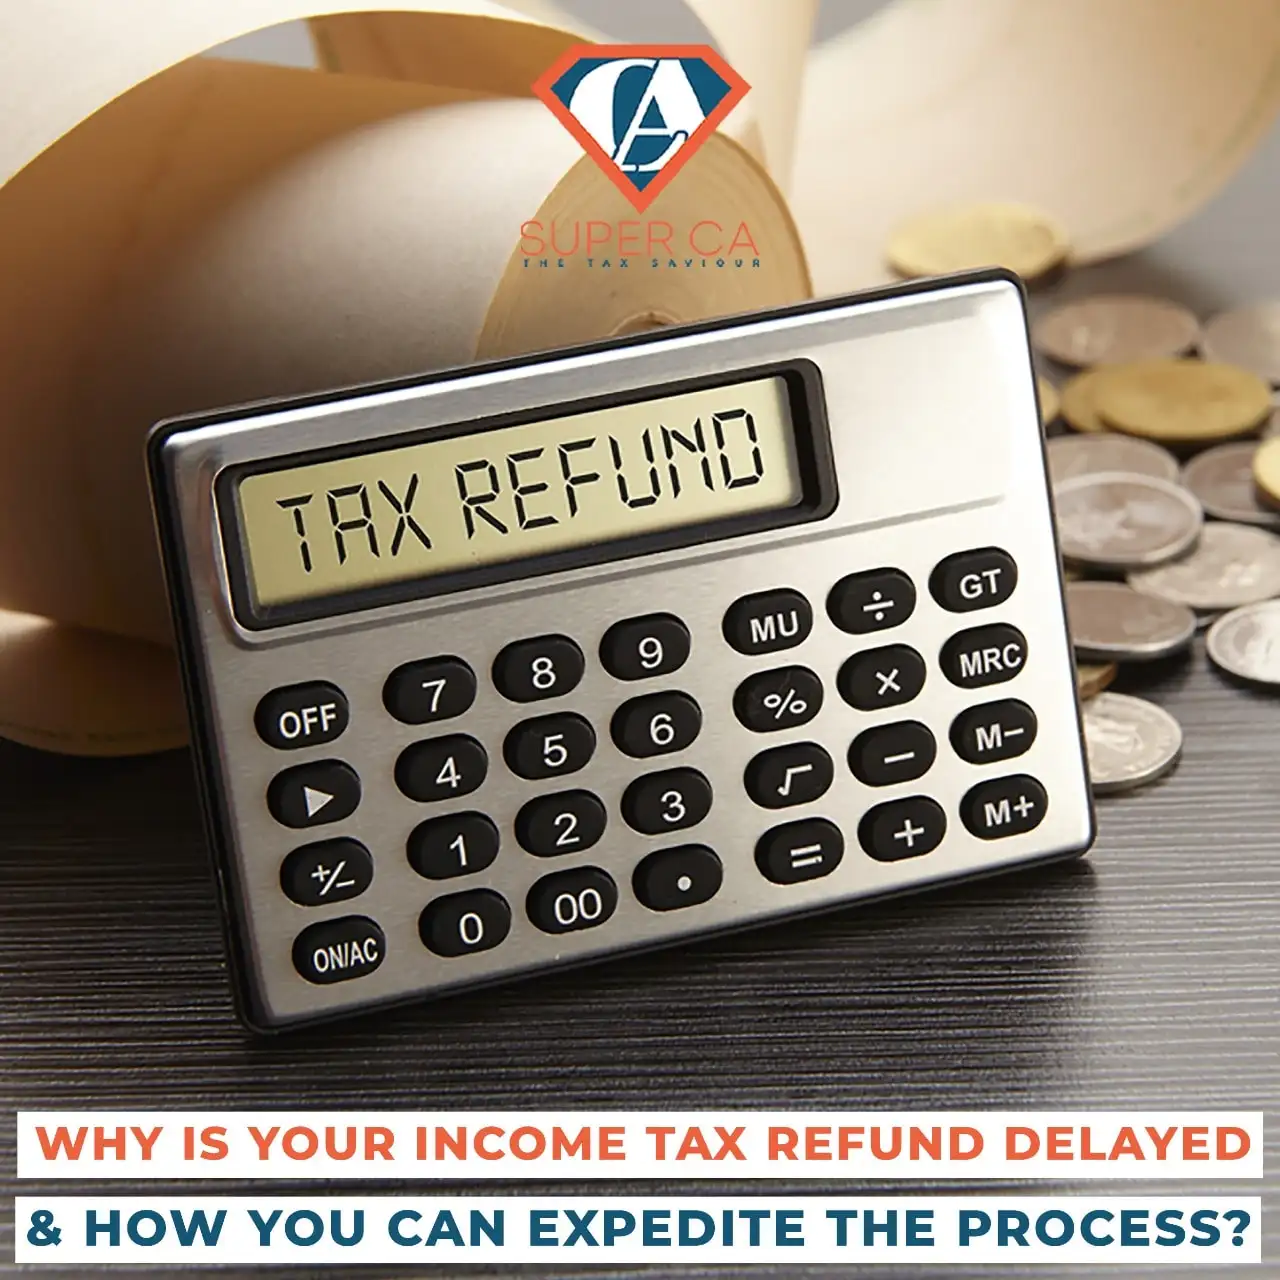 WHY IS YOUR INCOME TAX REFUND DELAYED AND HOW YOU CAN EXPEDITE THE PROCESS?